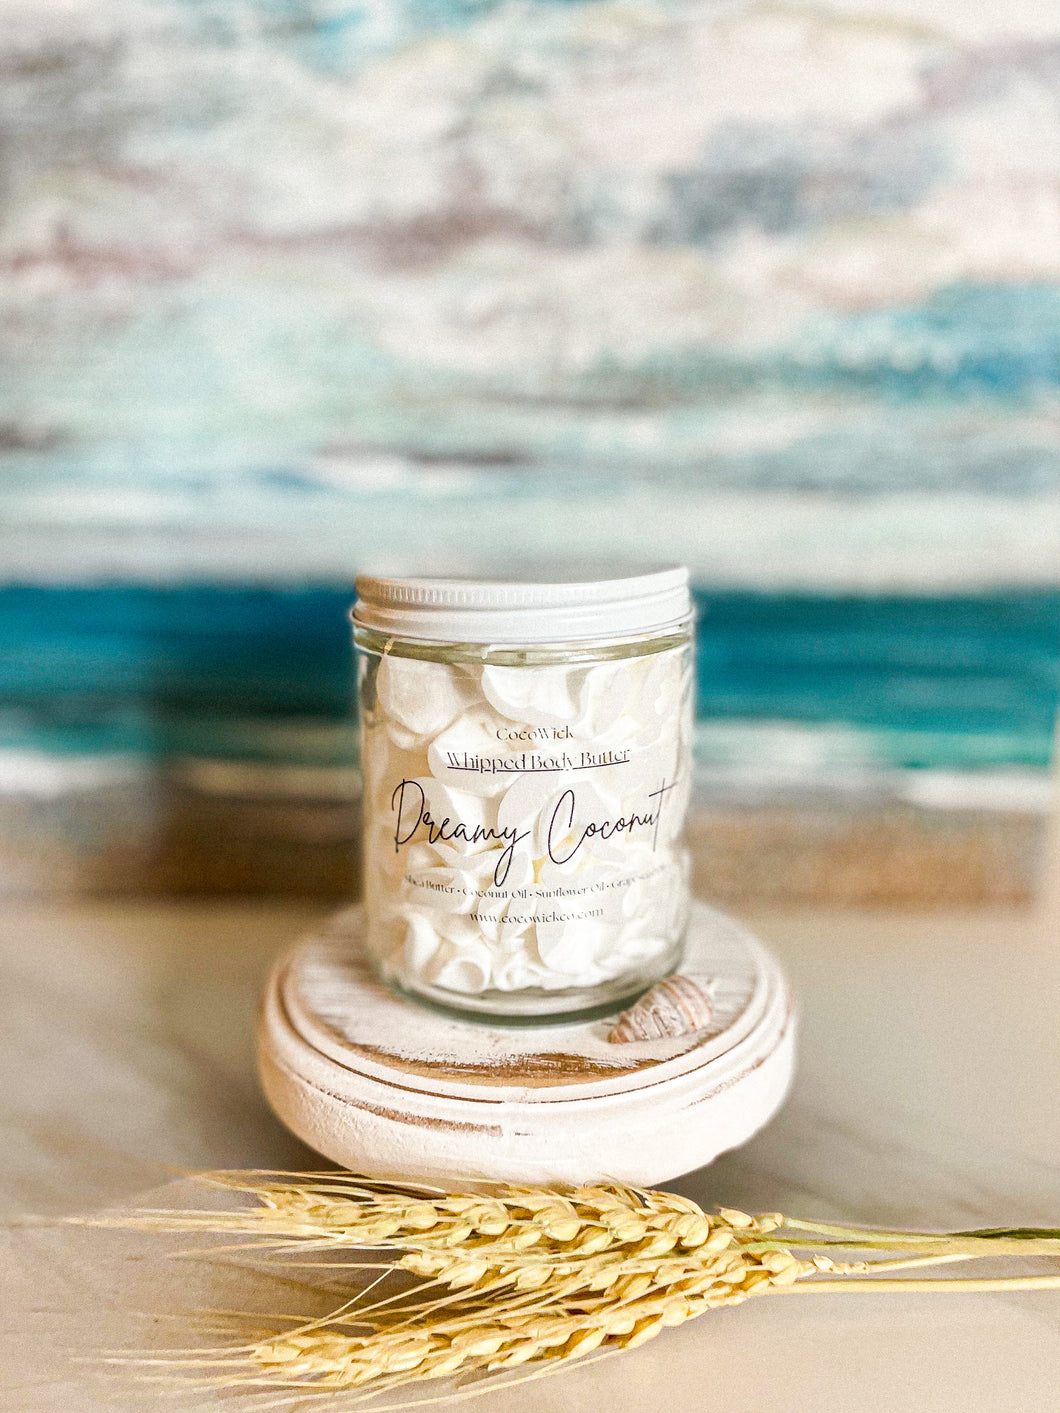 *Whipped Body Butter